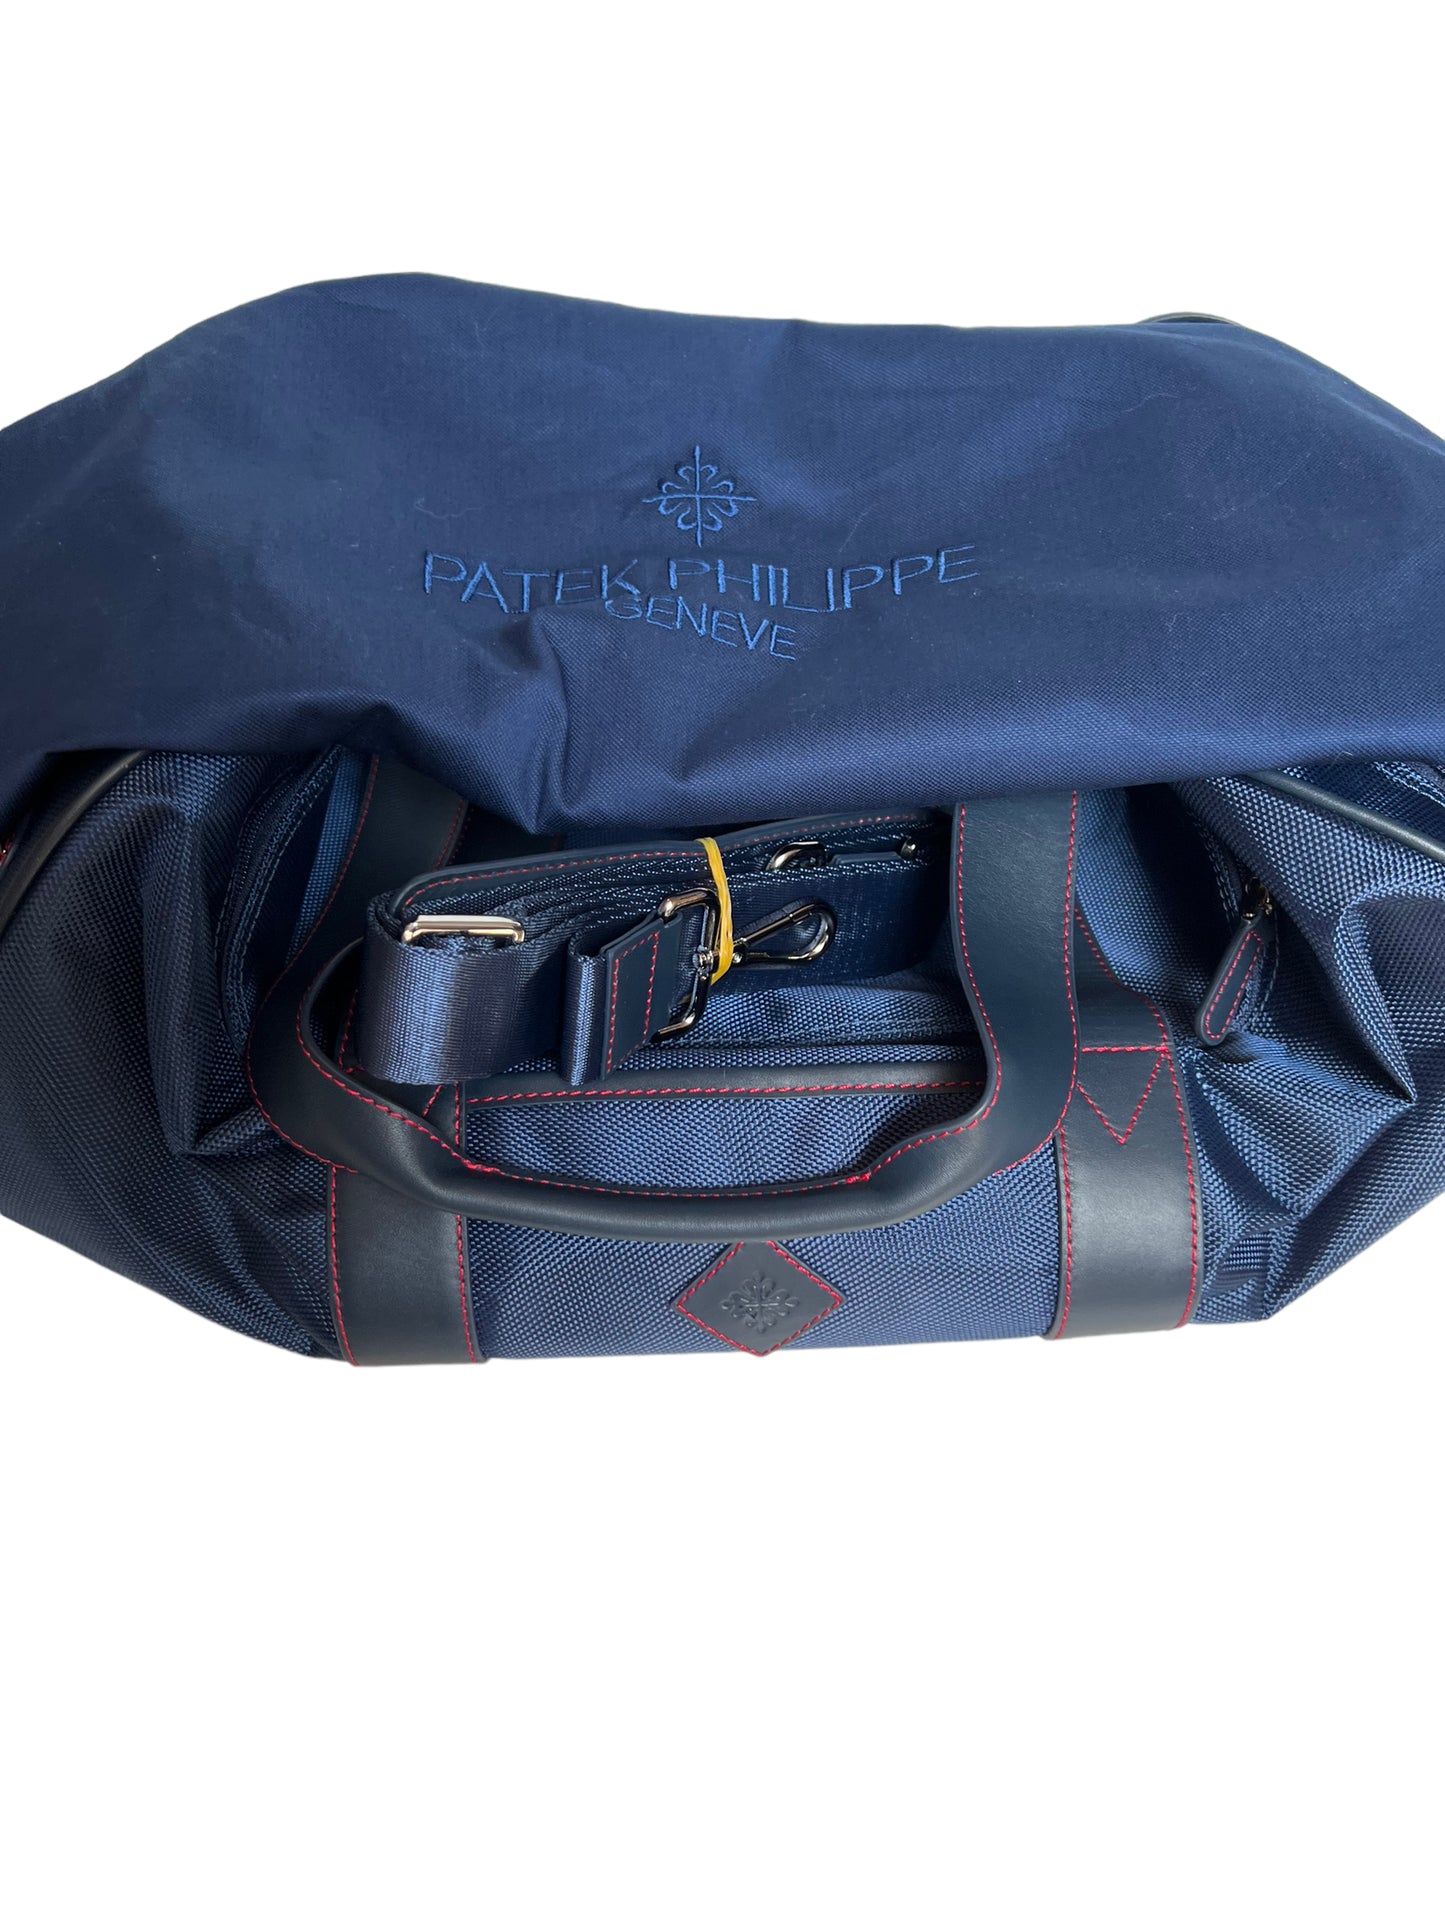 Patek Philippe New Travel/ Sports Bag/Sac/ Tasche Rare Collector with its Patek cushion